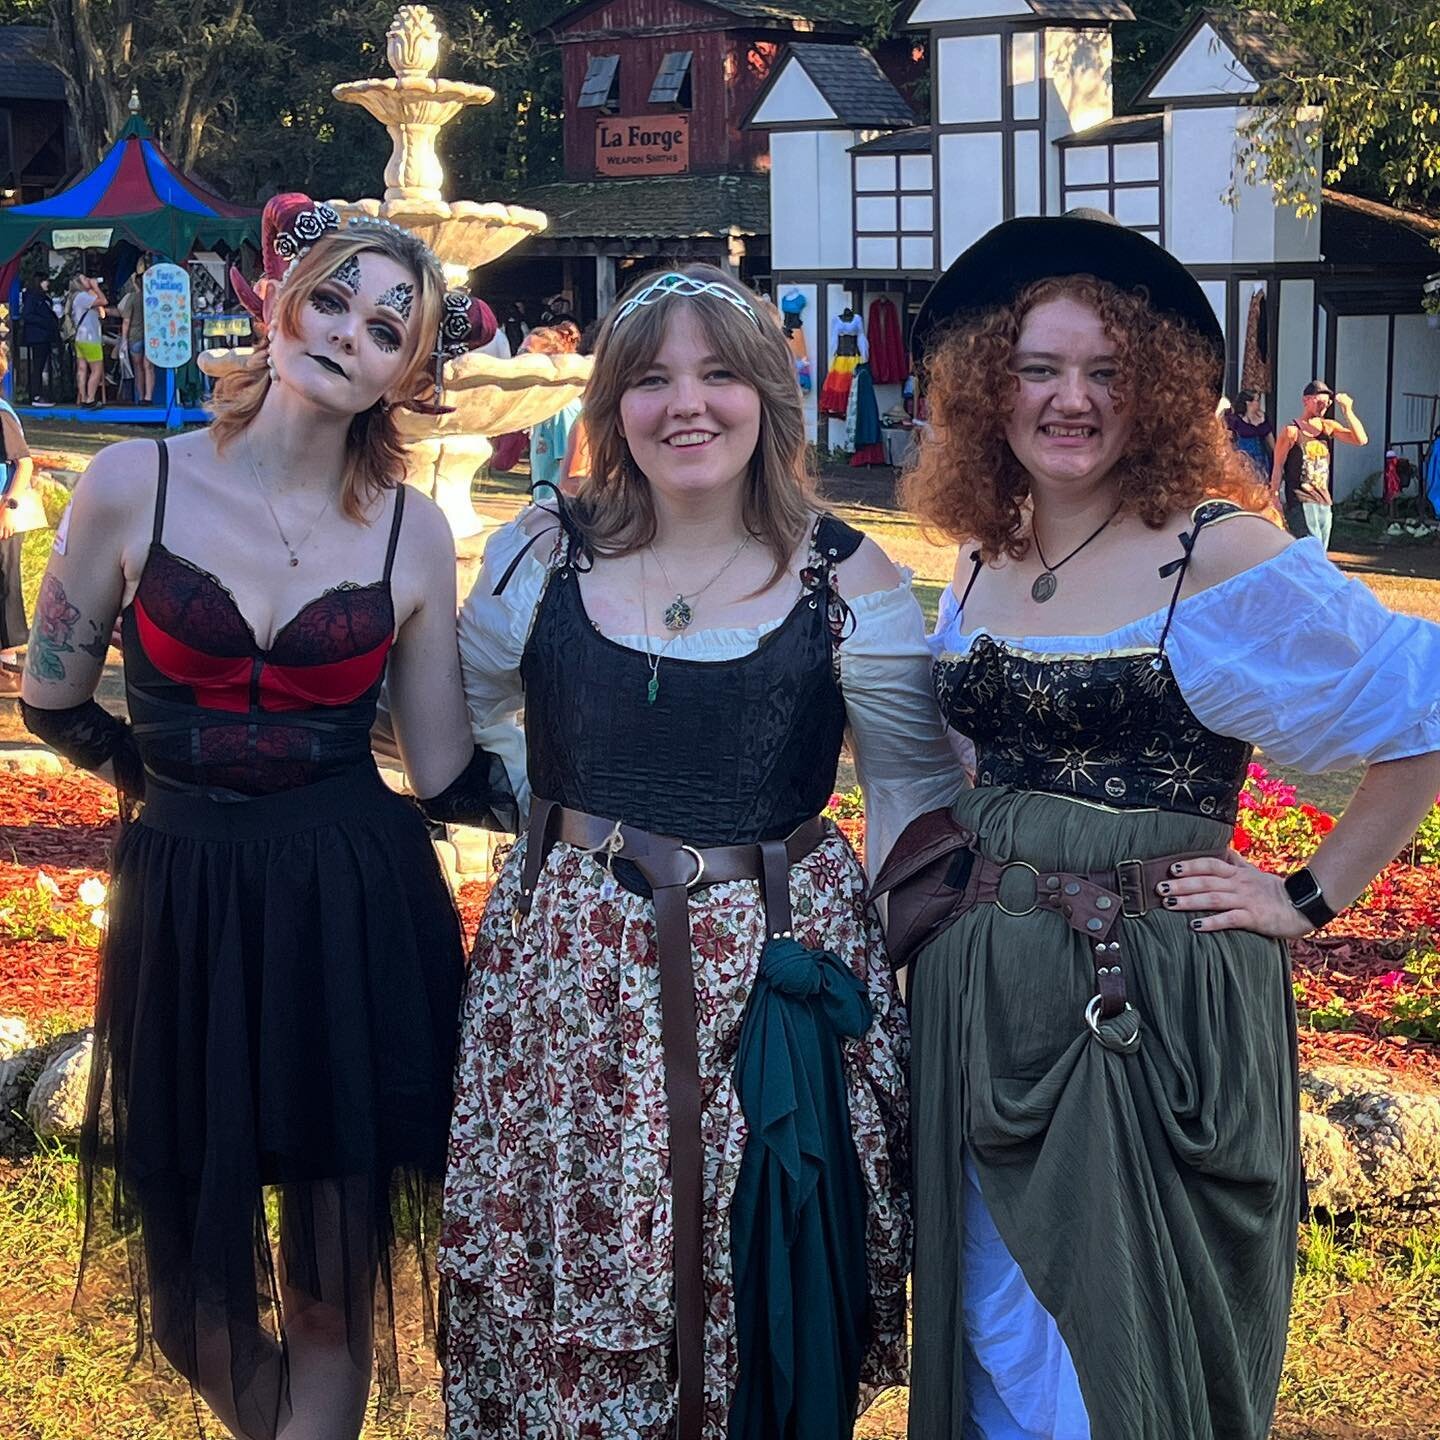 Went to the Ren faire last weekend! A very short break from a very busy semester, always a fun time with these two! @jess_a_ford @datedreference #renfaire #renaissancefaire #renaissancefestival